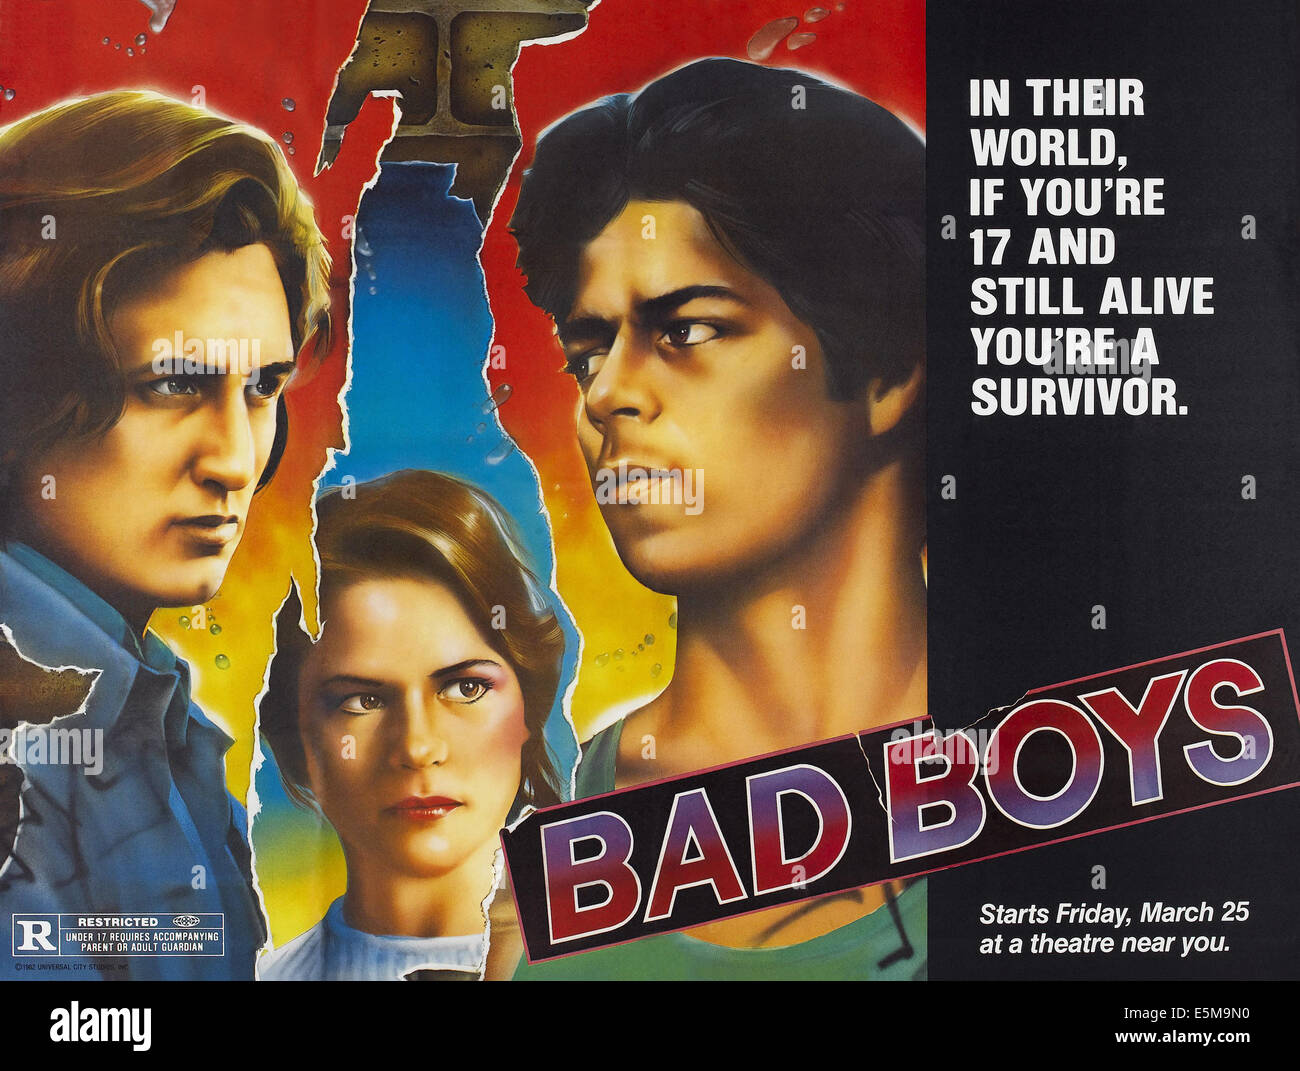 BAD BOYS, US lobby card, from left: Sean Penn, Ally Sheedy, Esai Morales, 1983, © Universal Pictures/courtesy Everett Collection Stock Photo